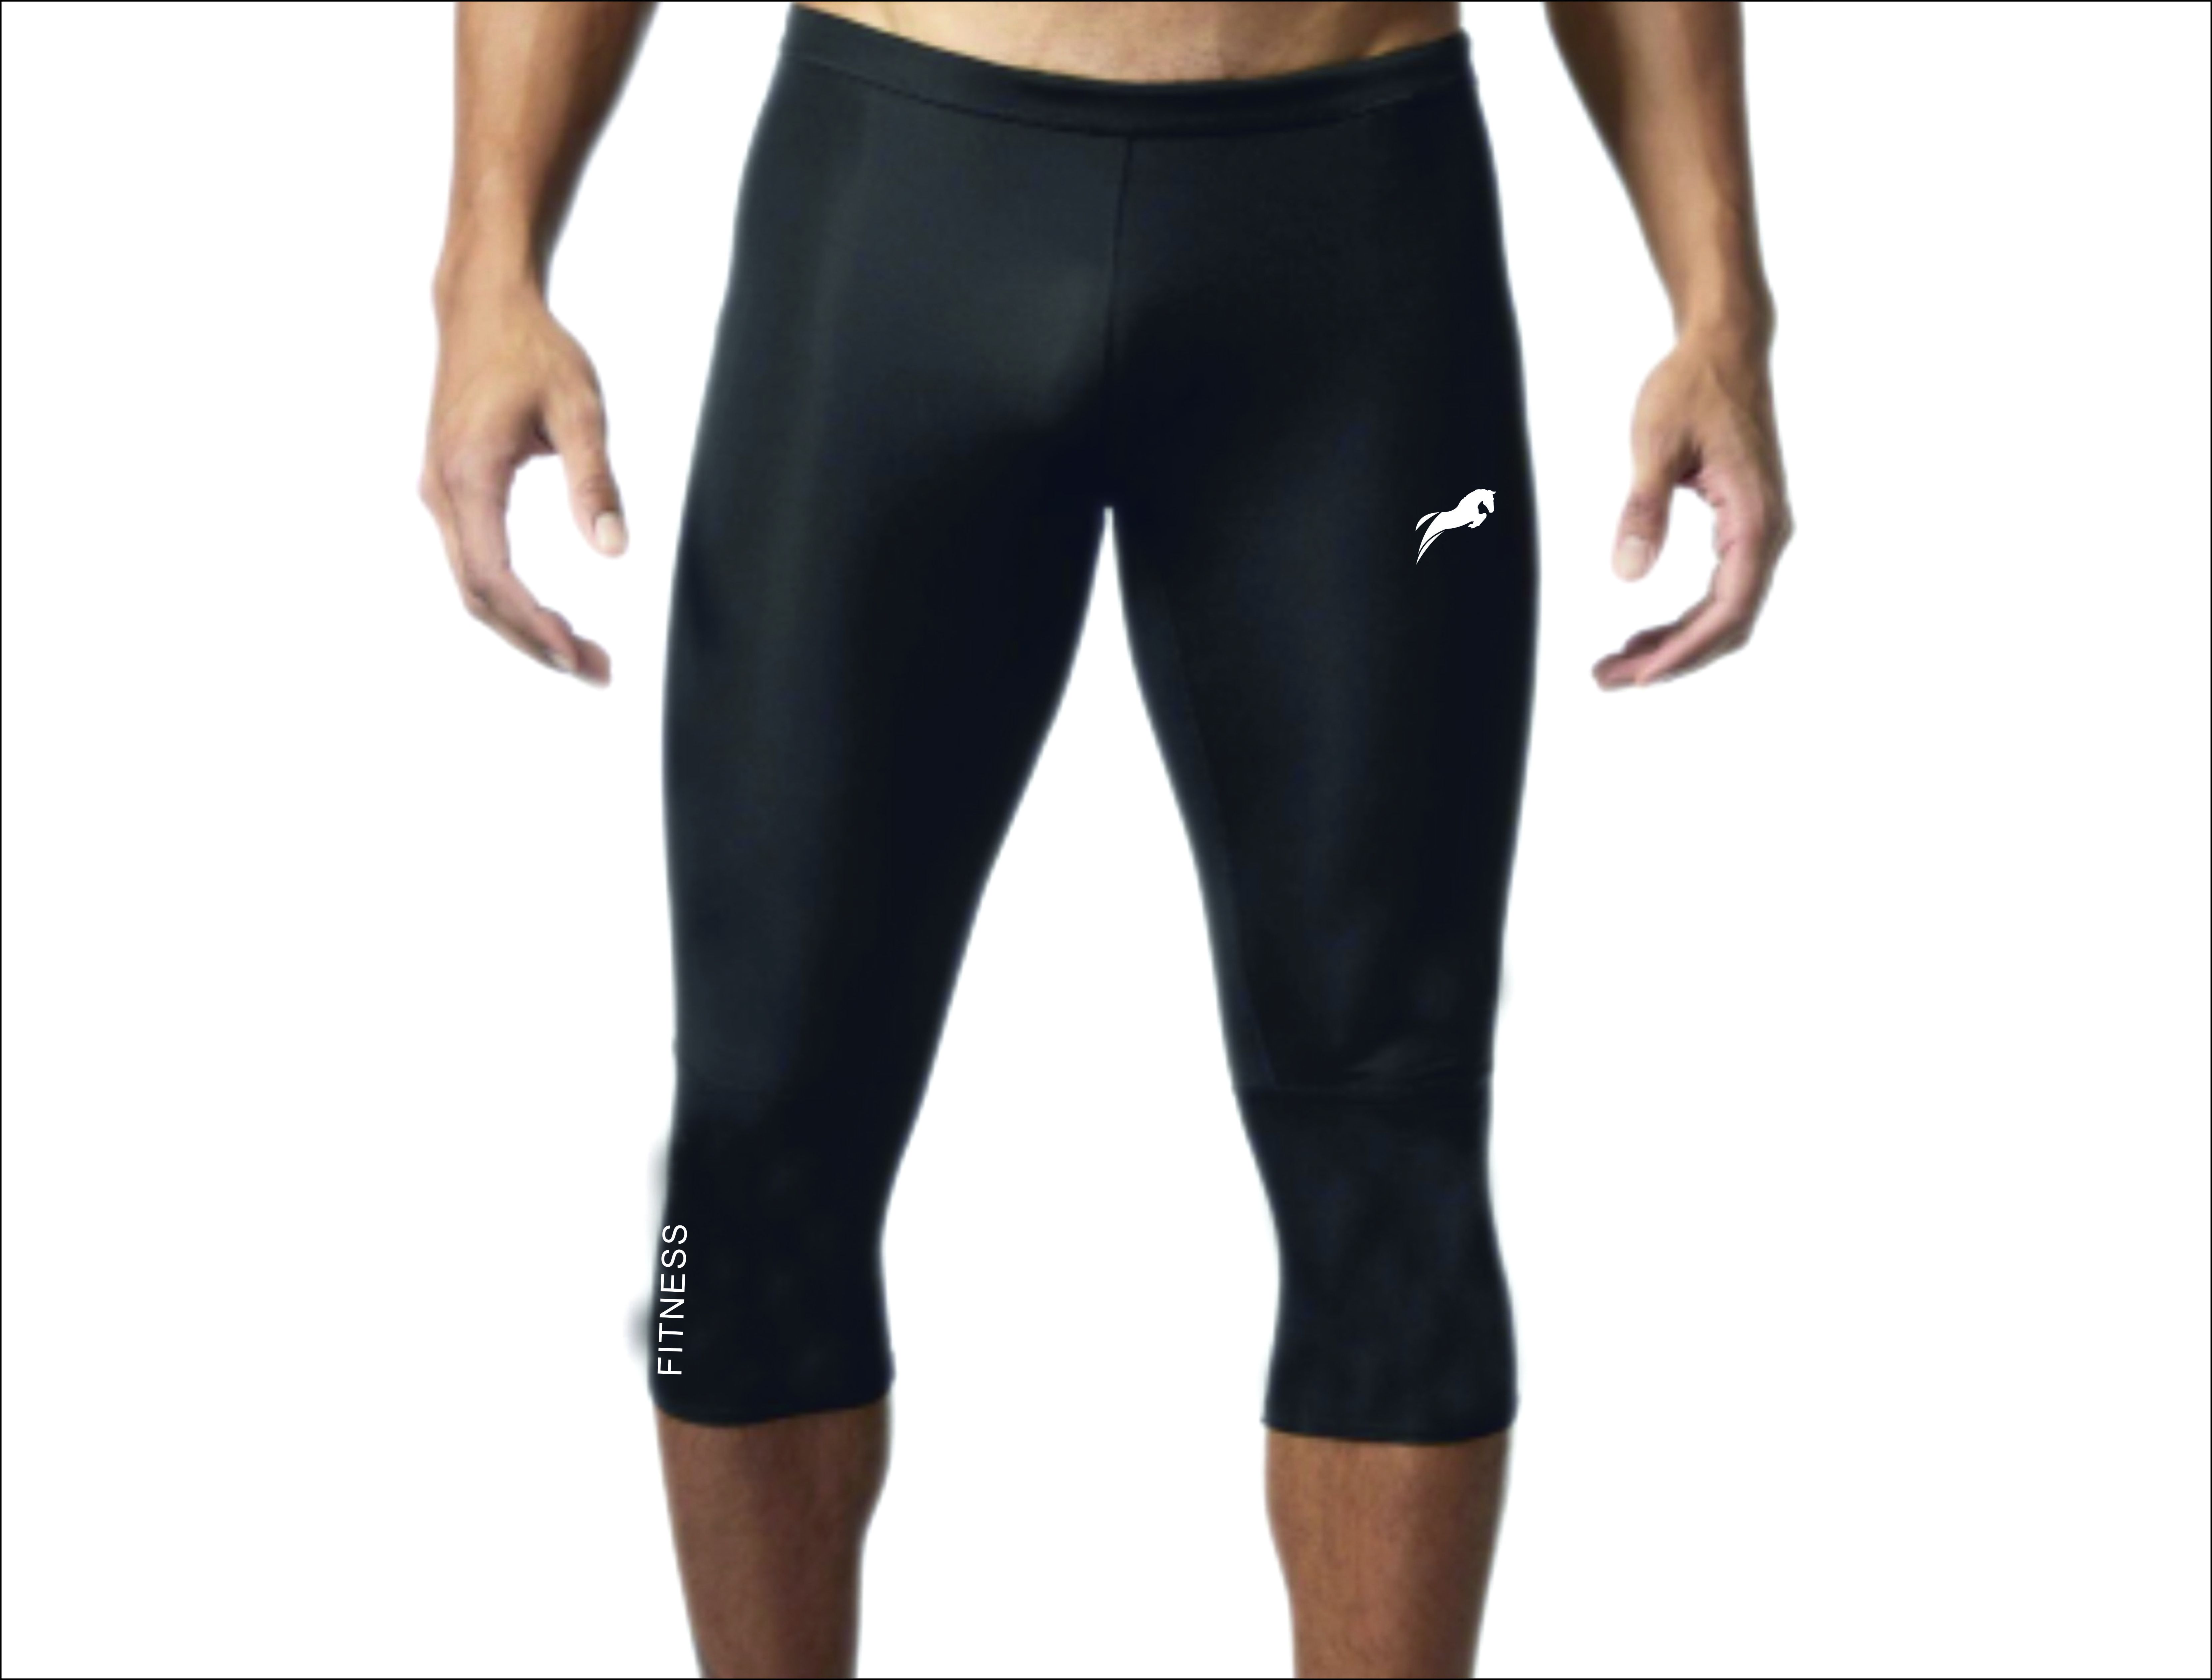     			Rider 3/4 CAPRI LENGTH COMPRESSION TIGHTS Multi Sports Cycling, Cricket, Football, Badminton, Gym, Fitness & Other Outdoor Inner Wear